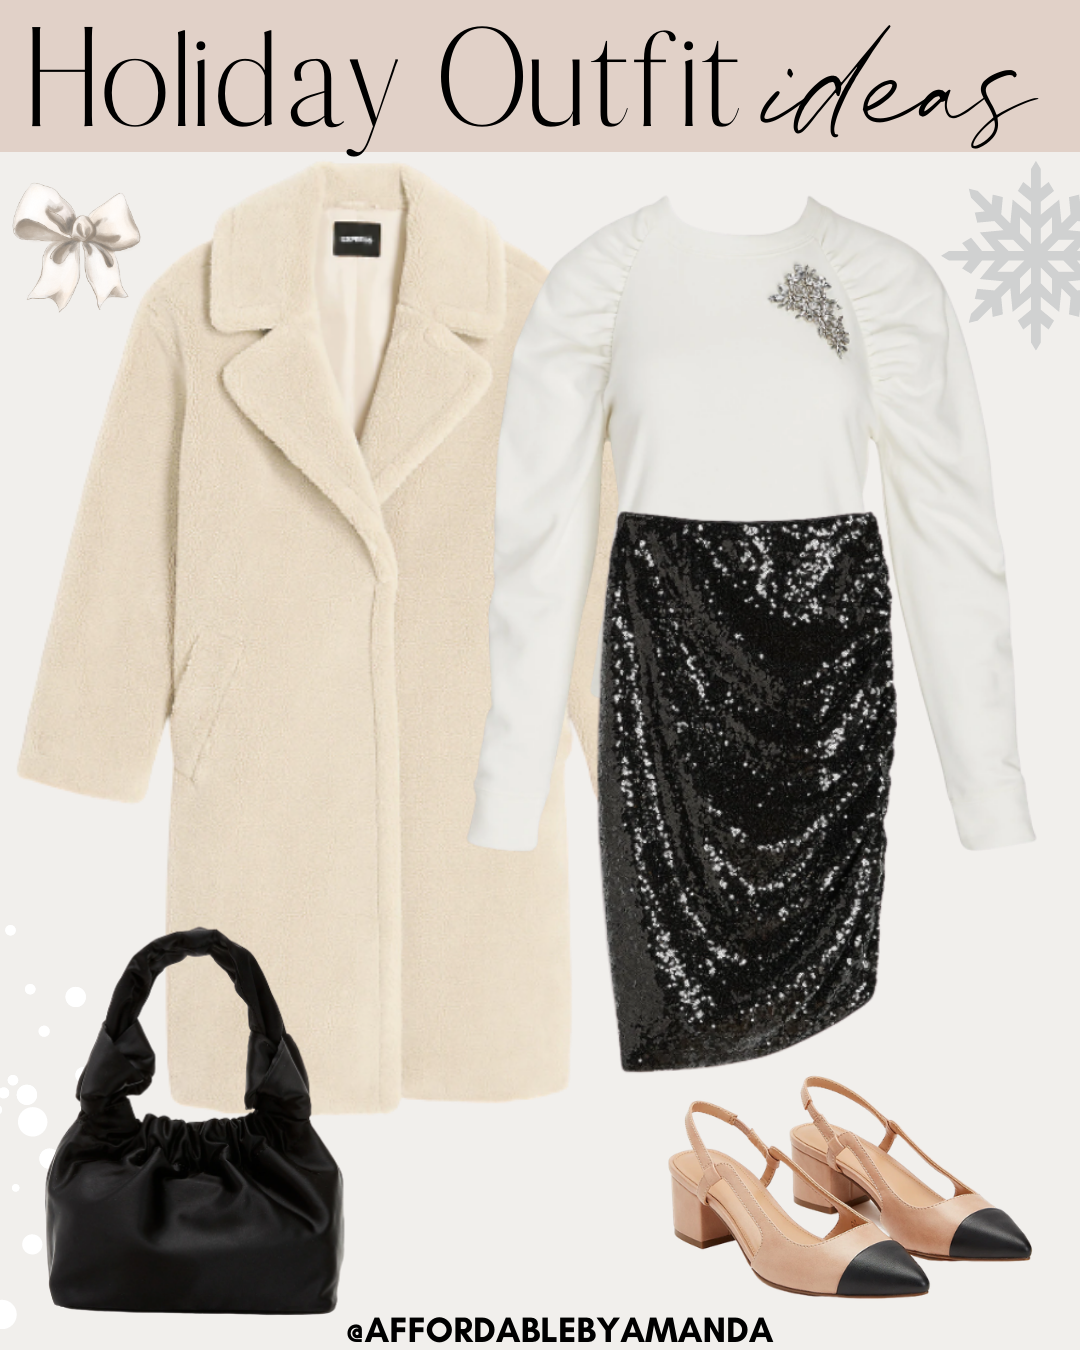 20 Holiday Outfit Ideas for 2020 - Holiday Fashion Trends 2020 - Best Holiday Outfits